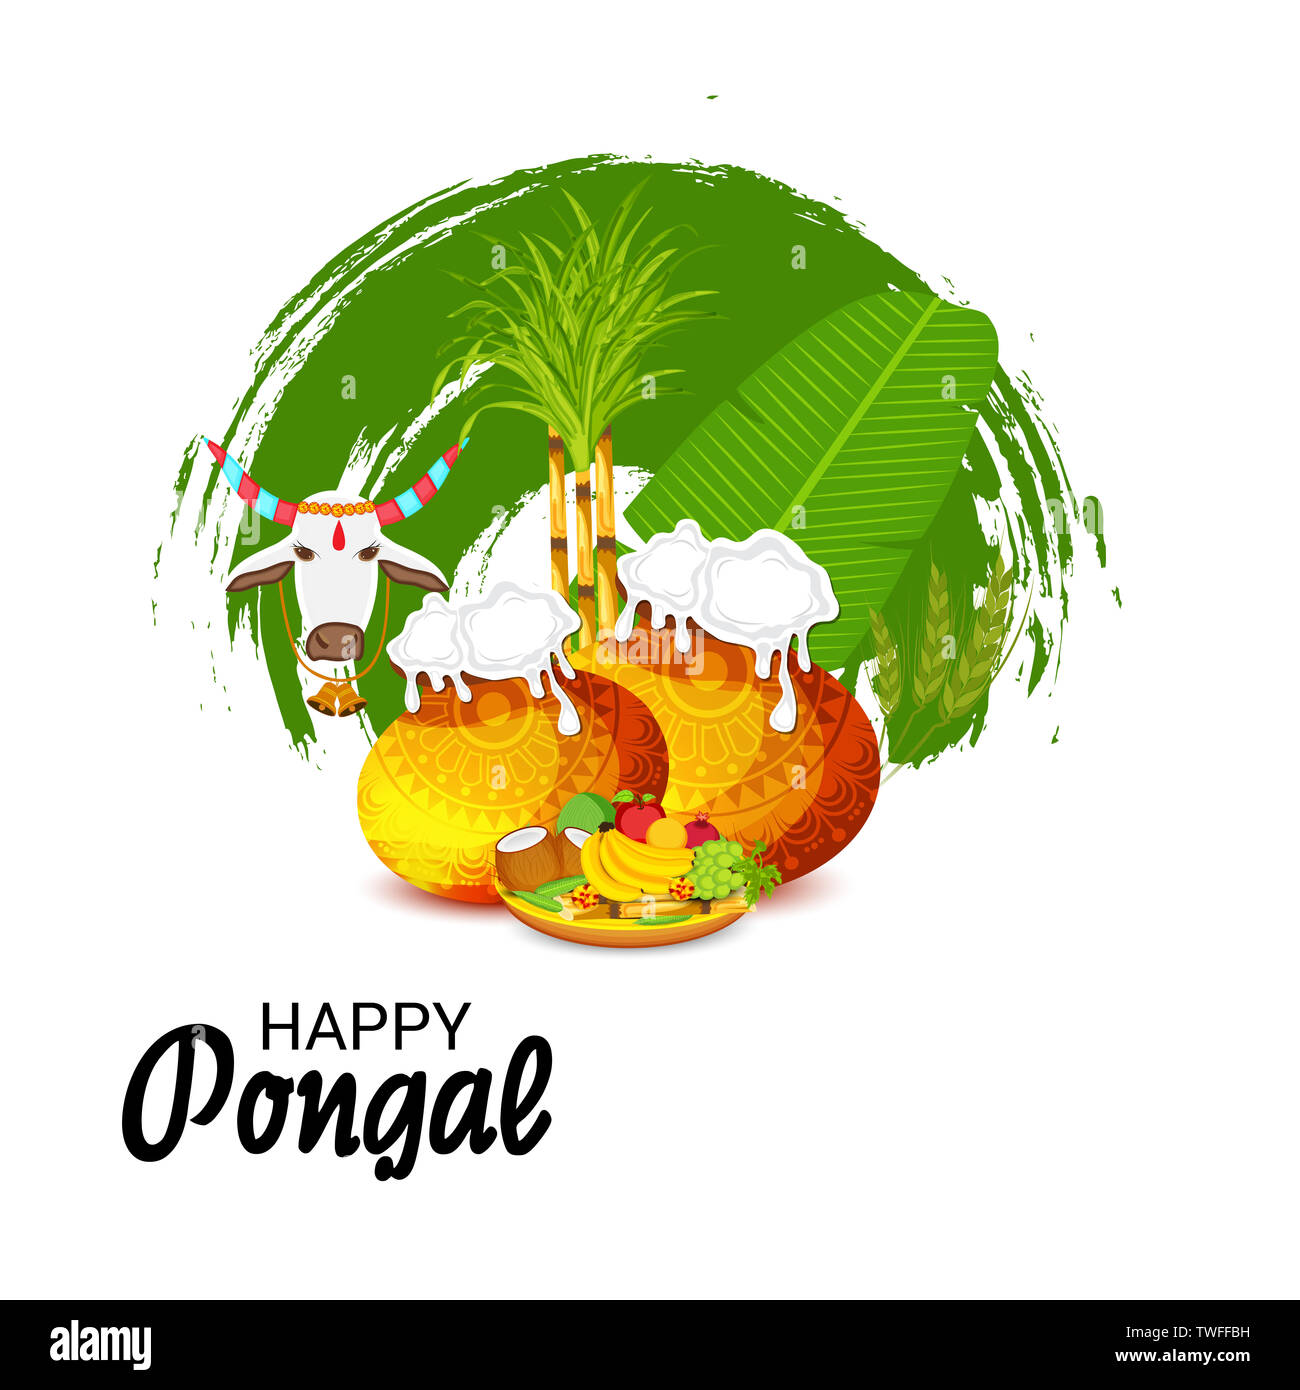 illustration of a background for Happy Pongal Stock Photo - Alamy